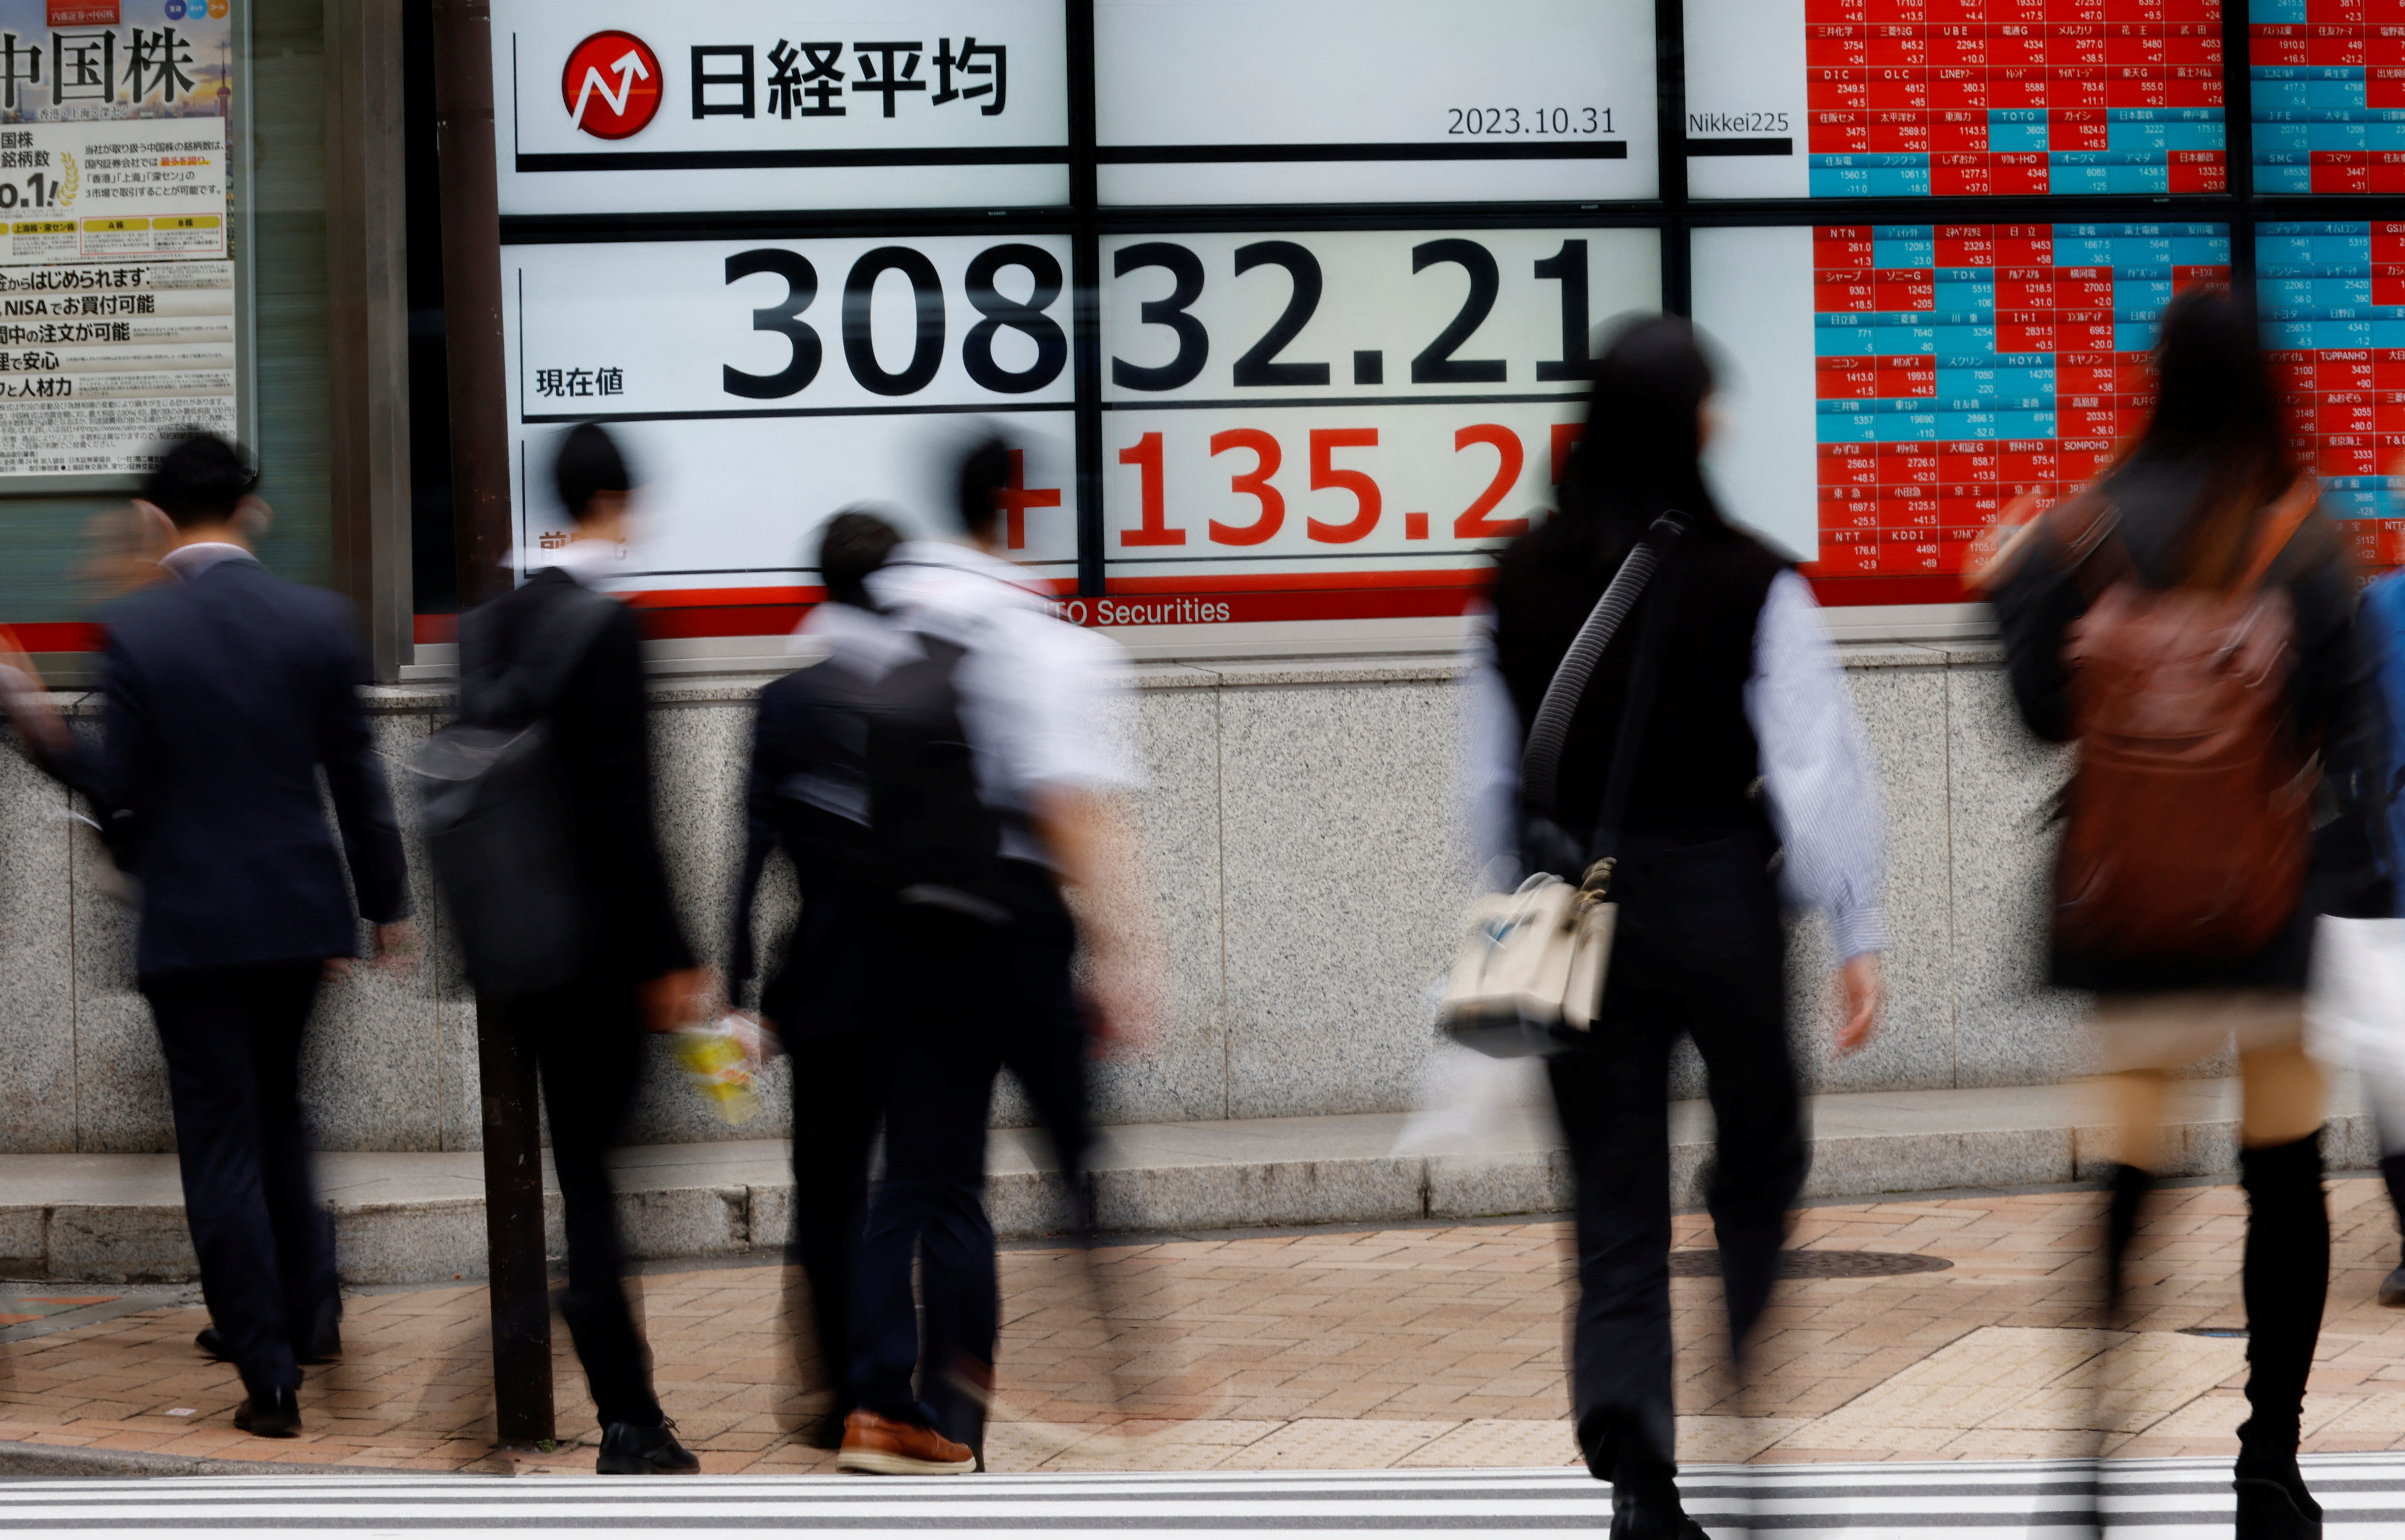 Pedestrians walk past an electronic board displaying the Nikkei stock average, outside a brokerage firm in Tokyo